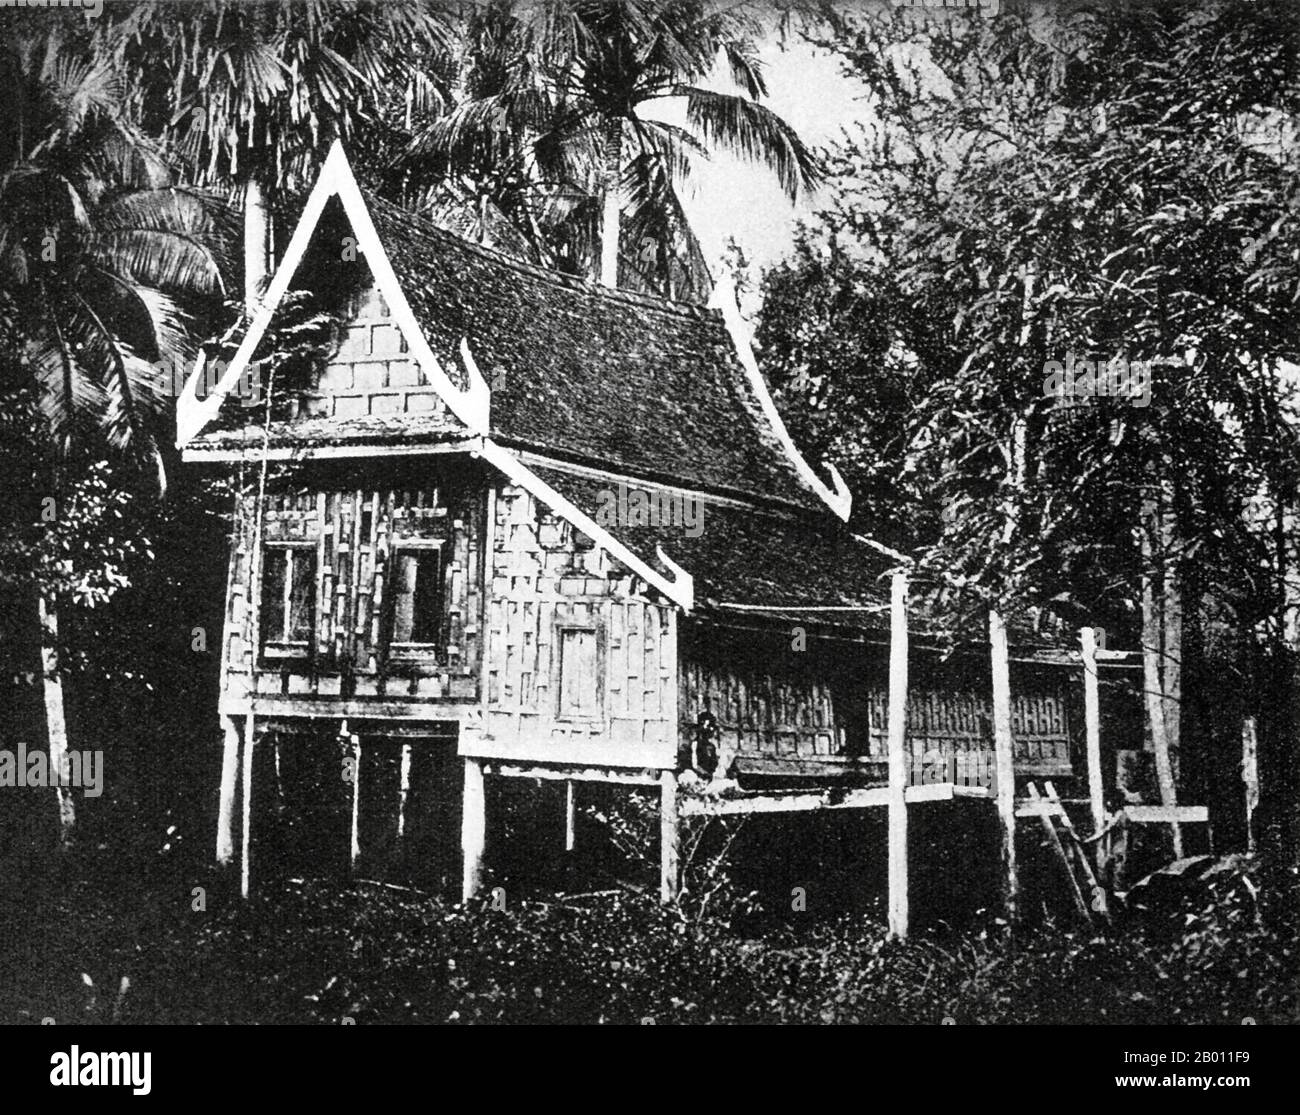 Thailand: A traditional Siamese house near Bangkok, c. 1900.  At the turn of the 20th century, the vast majority of Siamese were rice farmers who lived and worked along waterways. Every household had a boat, an estimated 600,000 of which navigated the canals and rivers of Bangkok. Rowing was done from the back of the boat. Most houses were made from wood and bamboo, and were built on stilts with a ladder running to the water. Stock Photo